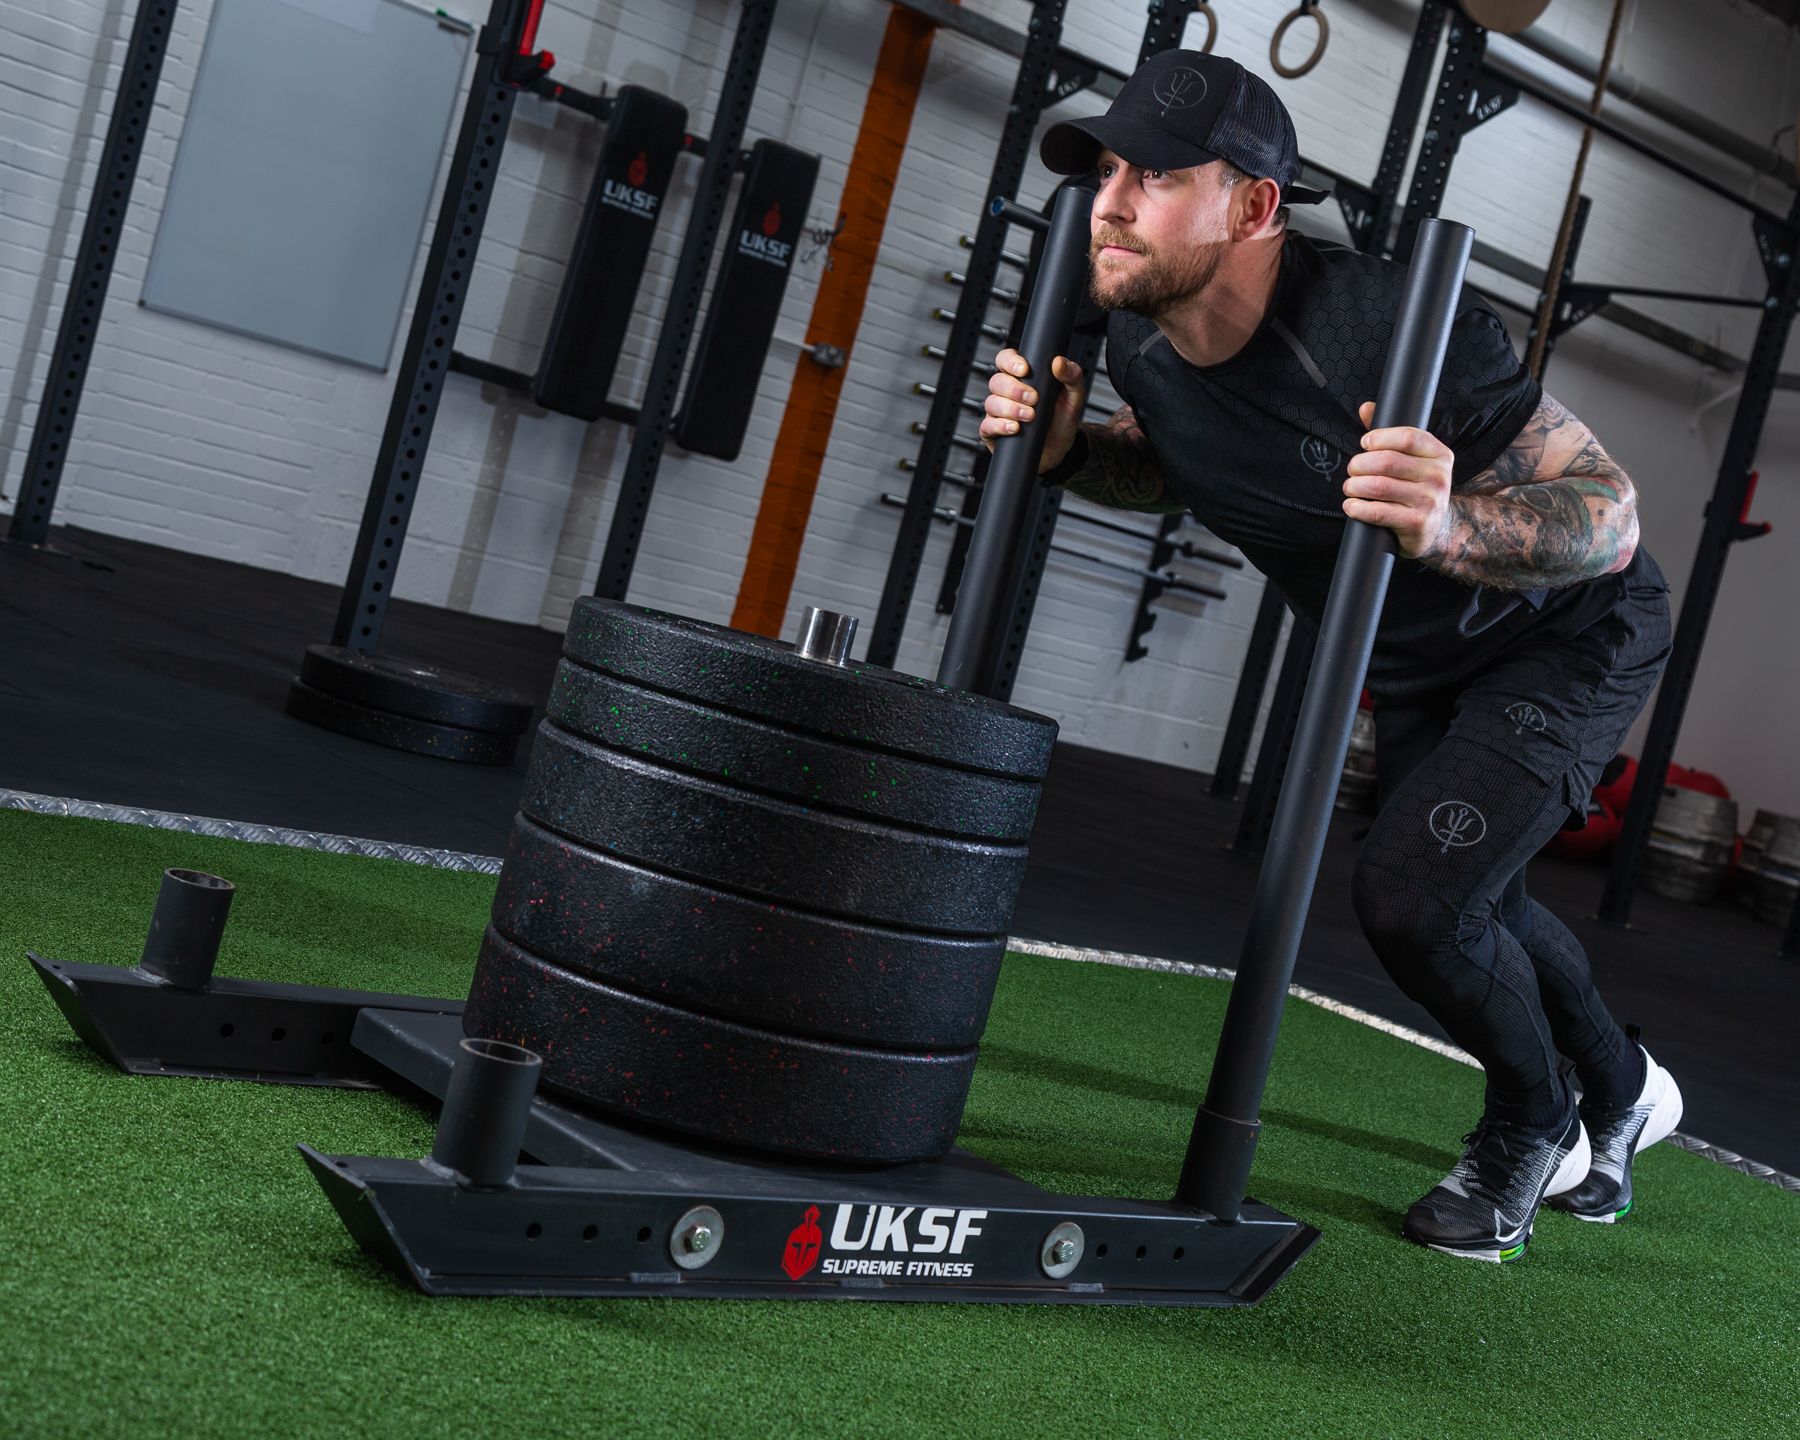 An Introduction To The Prowler Sled